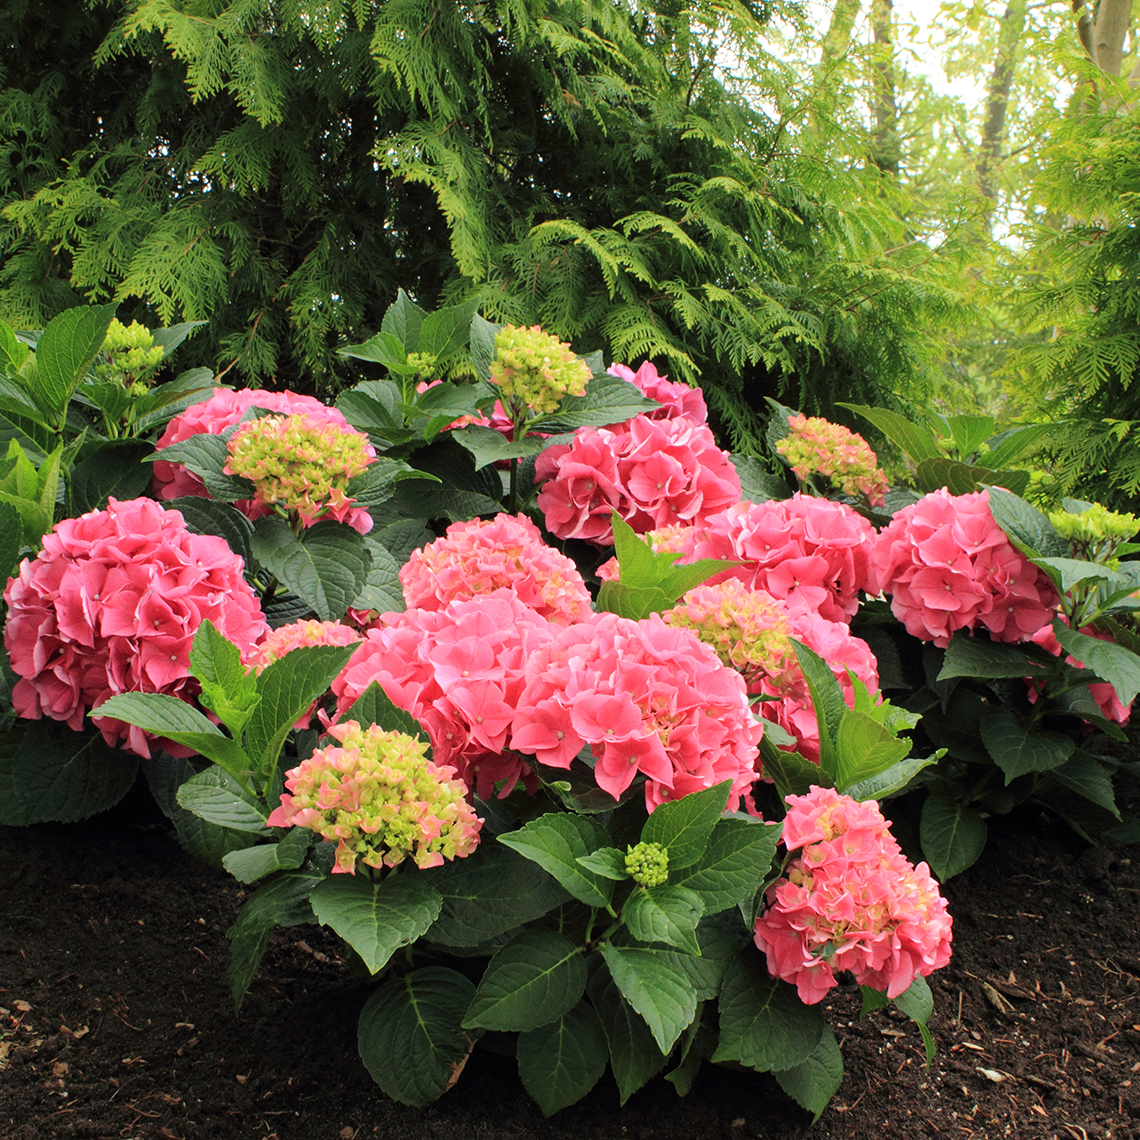 Cityline Vienna hydrangea covered in pink mophead blooms in a landscape against a background of arborvitae